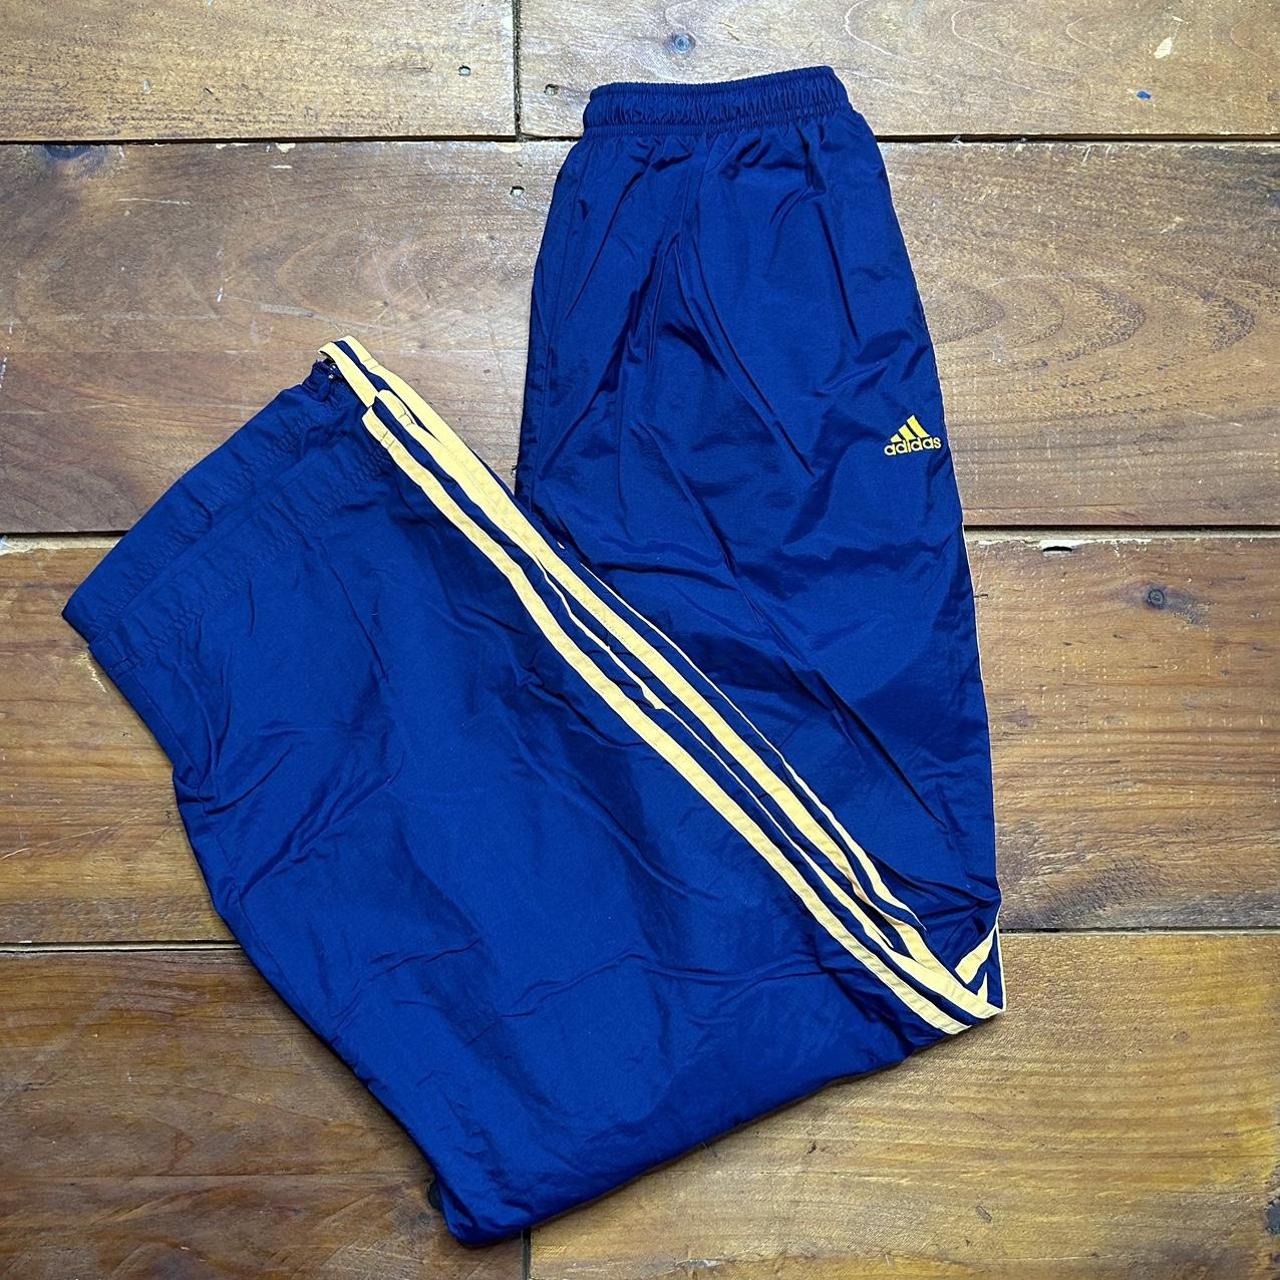 Adidas Men's Navy and Yellow Joggers-tracksuits | Depop